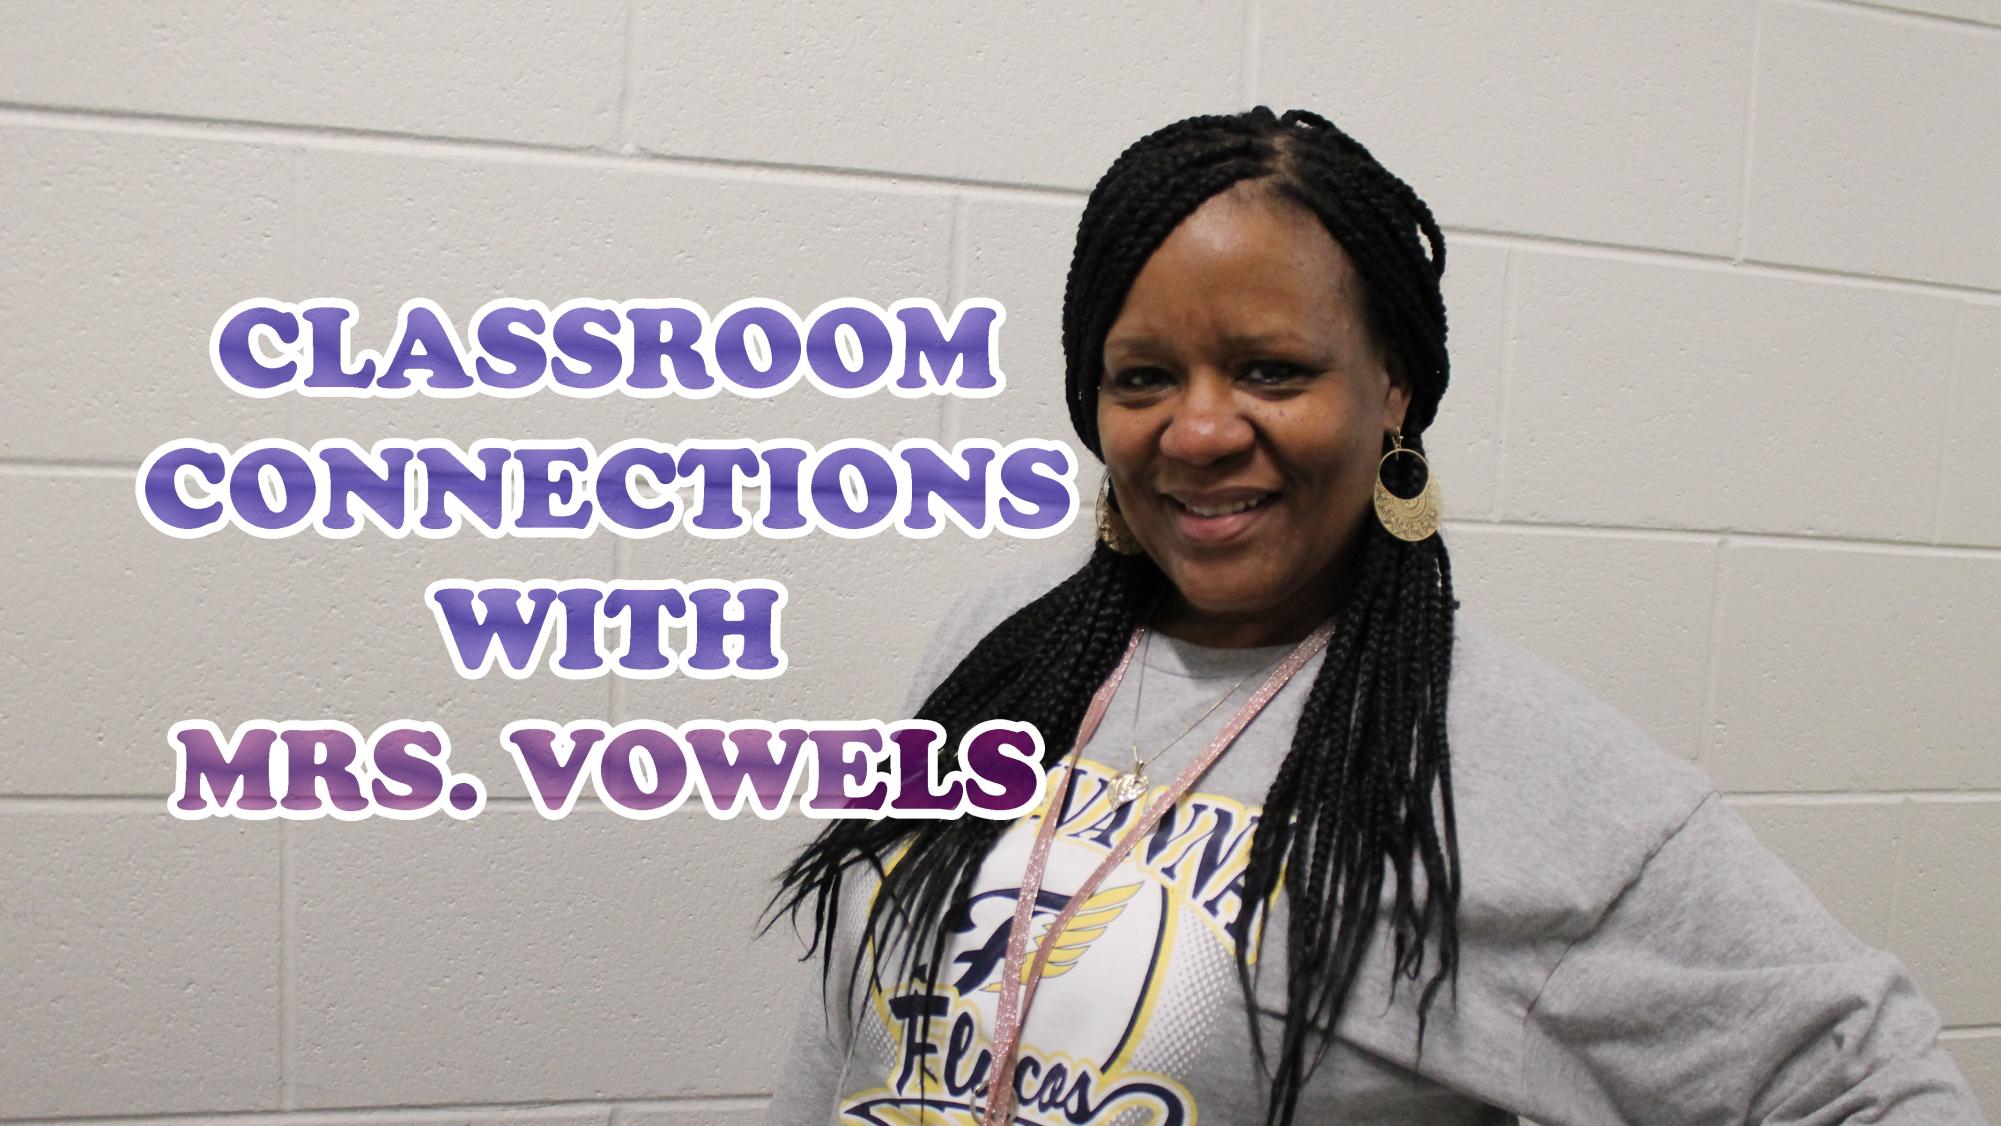 Classroom Connections With Mrs. Vowels